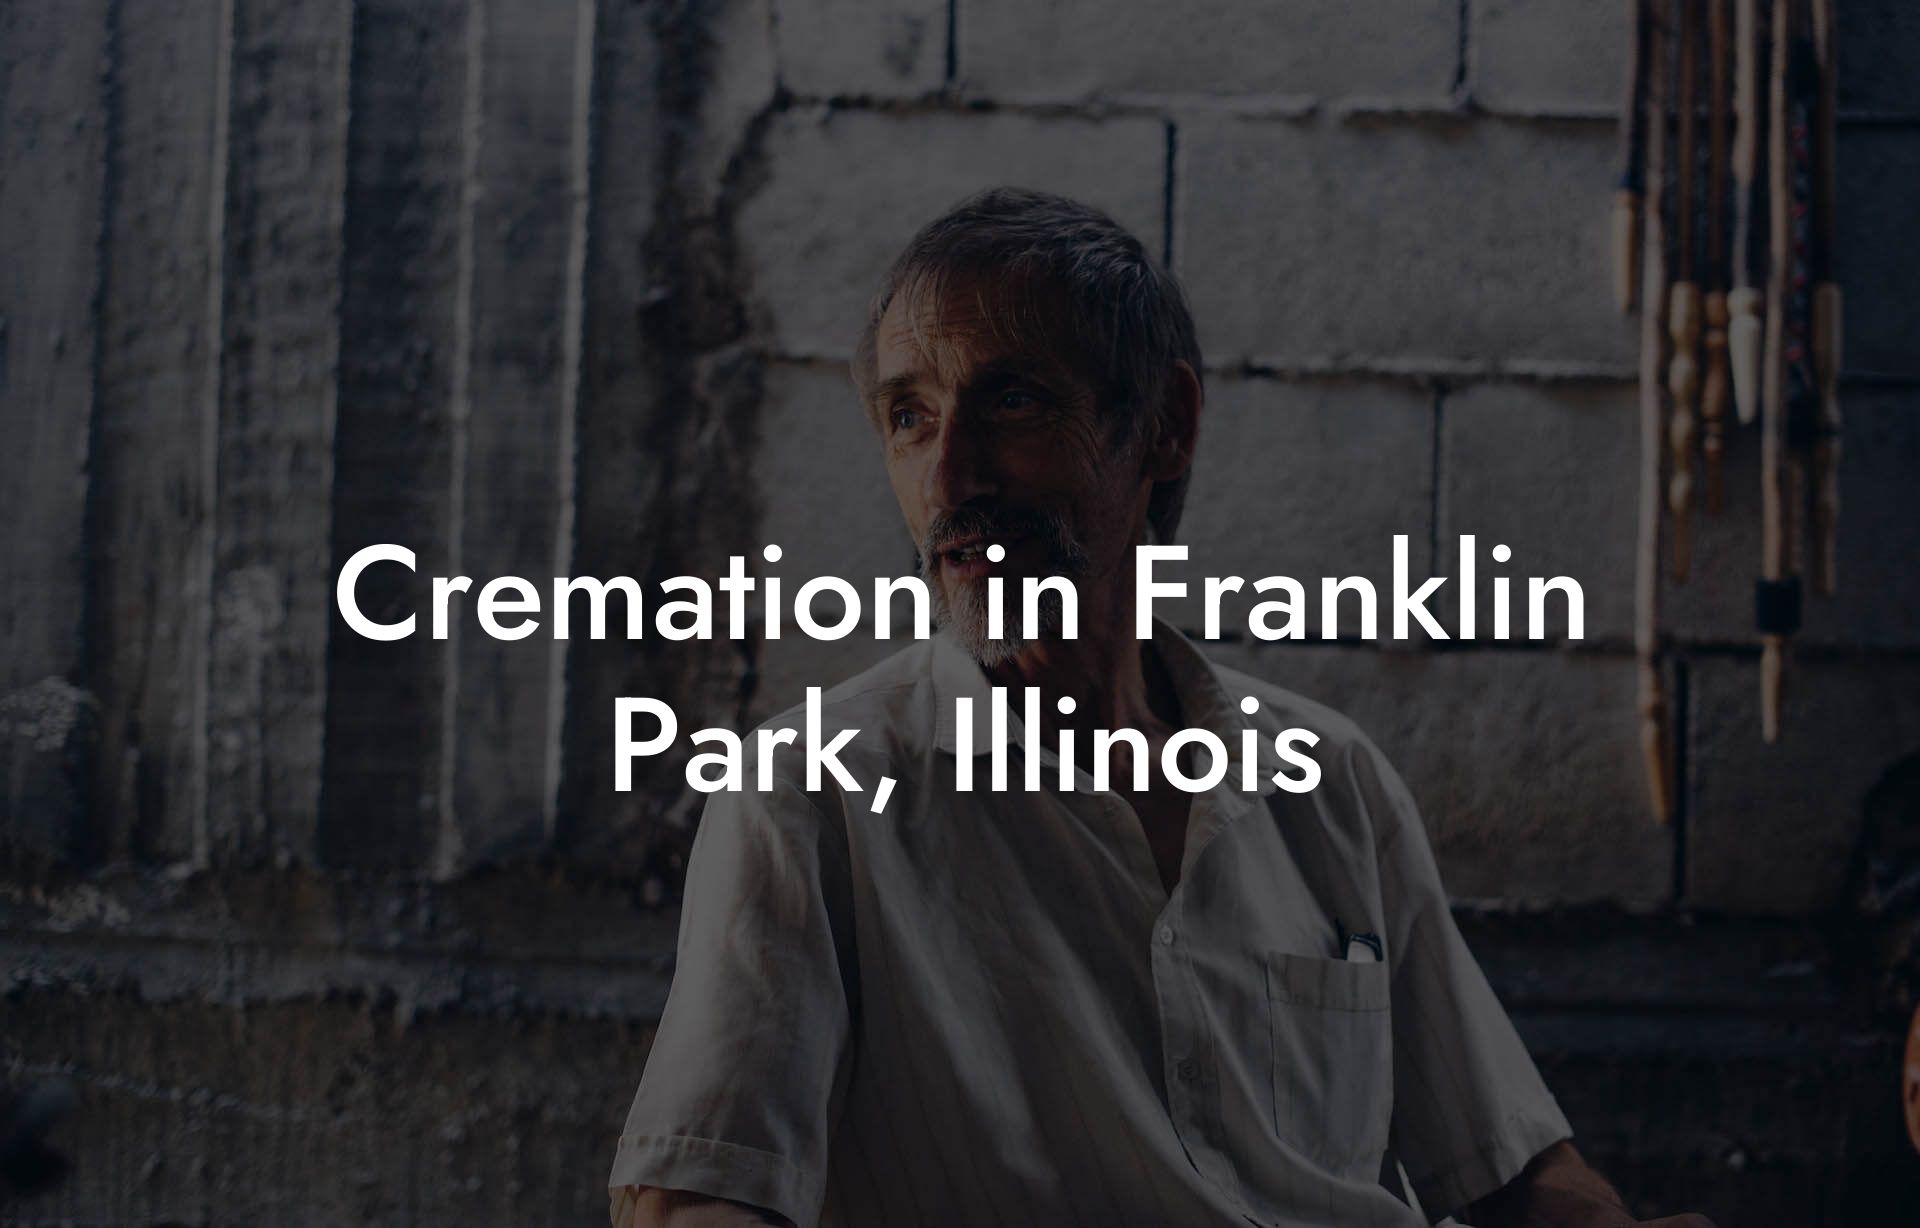 Cremation in Franklin Park, Illinois